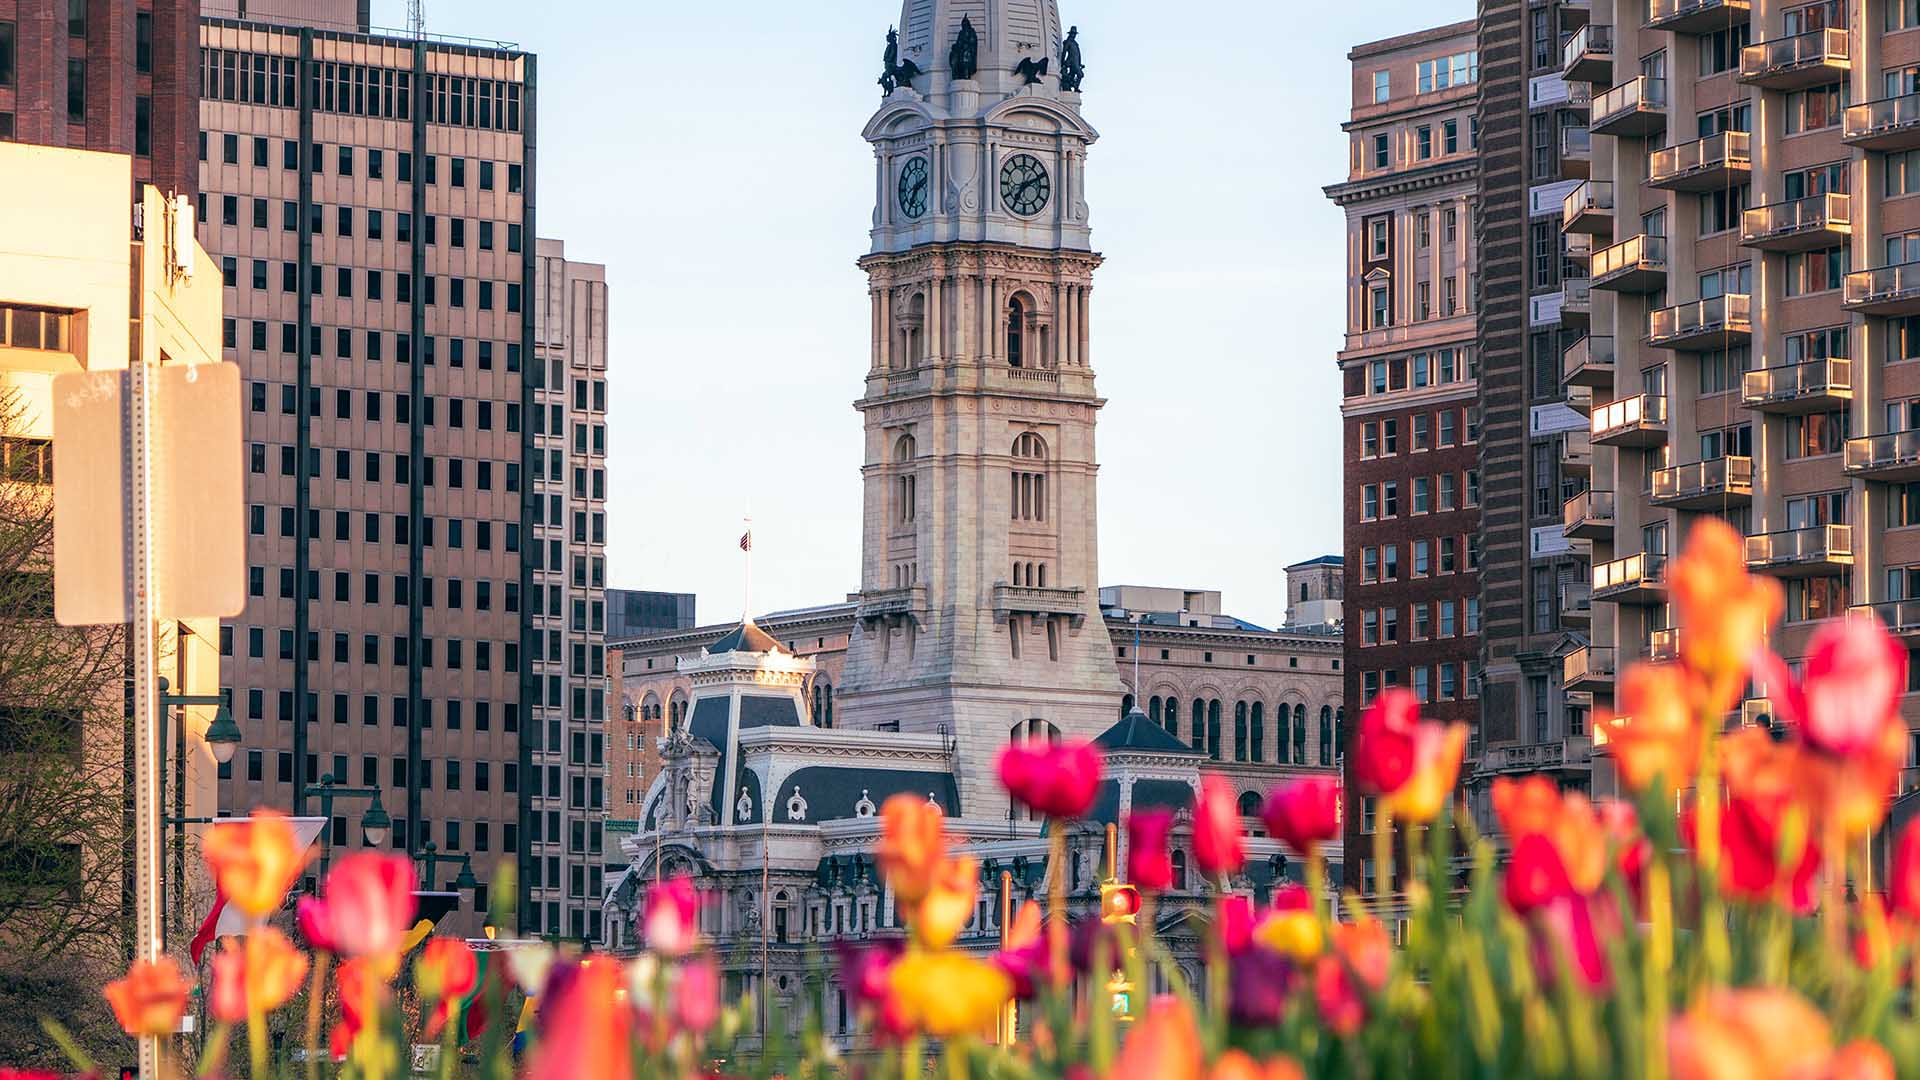 Bright pink and yellow tulips with Philadelphia's city hall in the background.